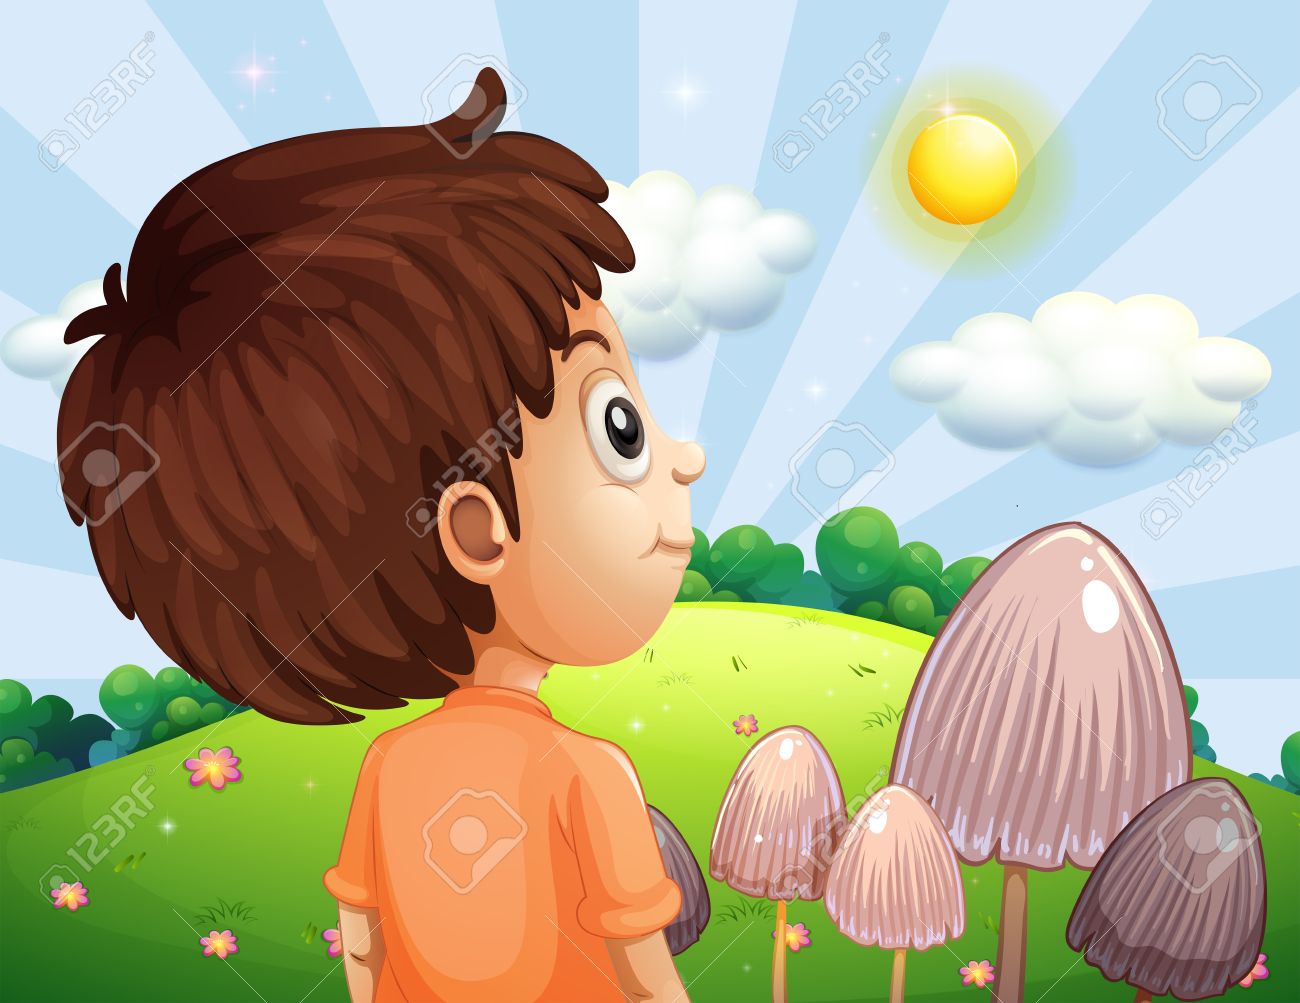 Illustration Of A Boy Looking At The Sun Royalty Free Cliparts.